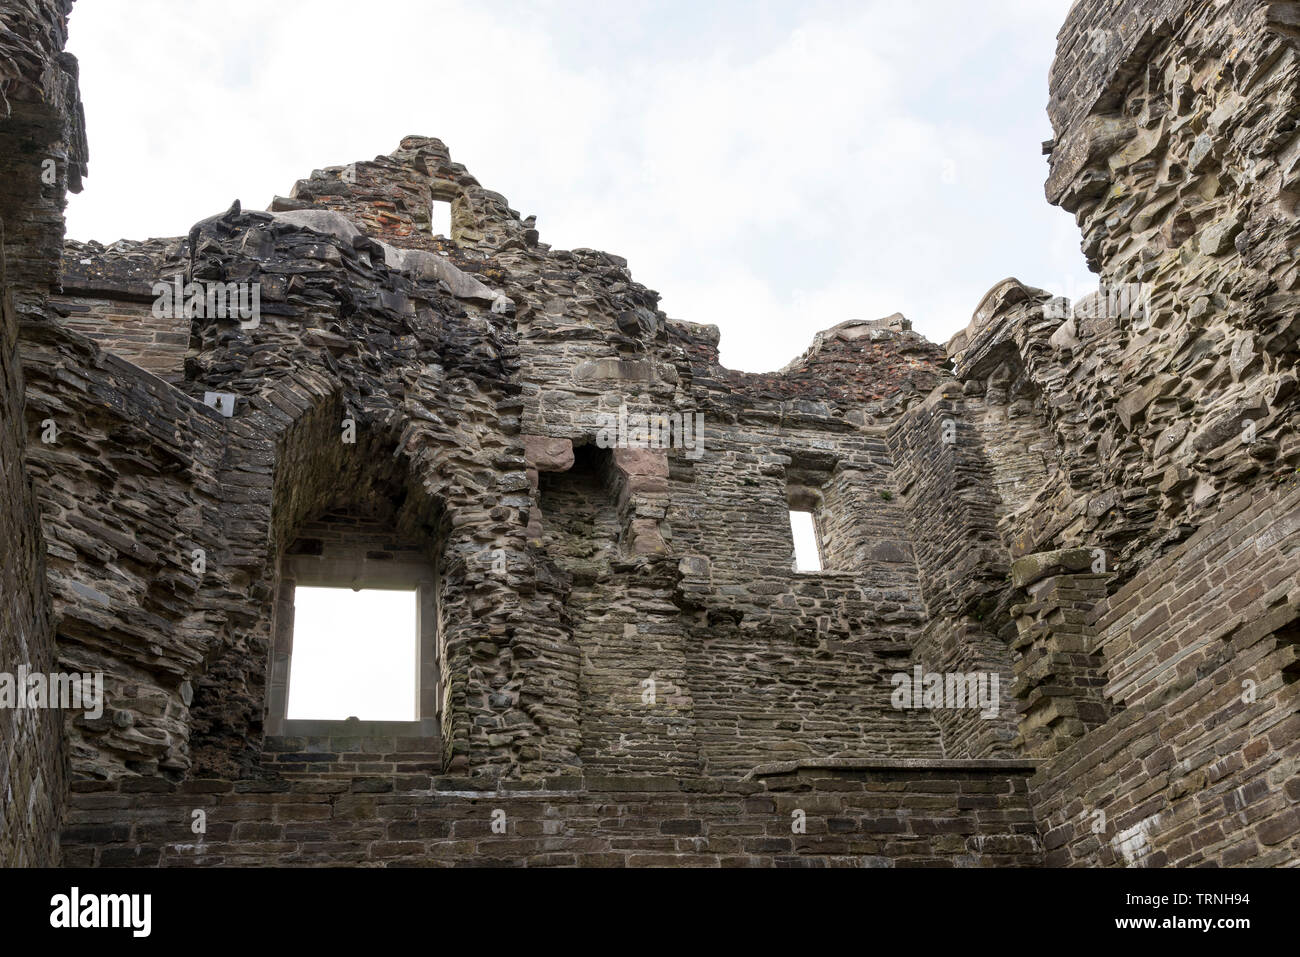 Hopton Castle, Shropshire, England. Restored as a historic visitor attraction in the Shropshire hills. Stock Photo